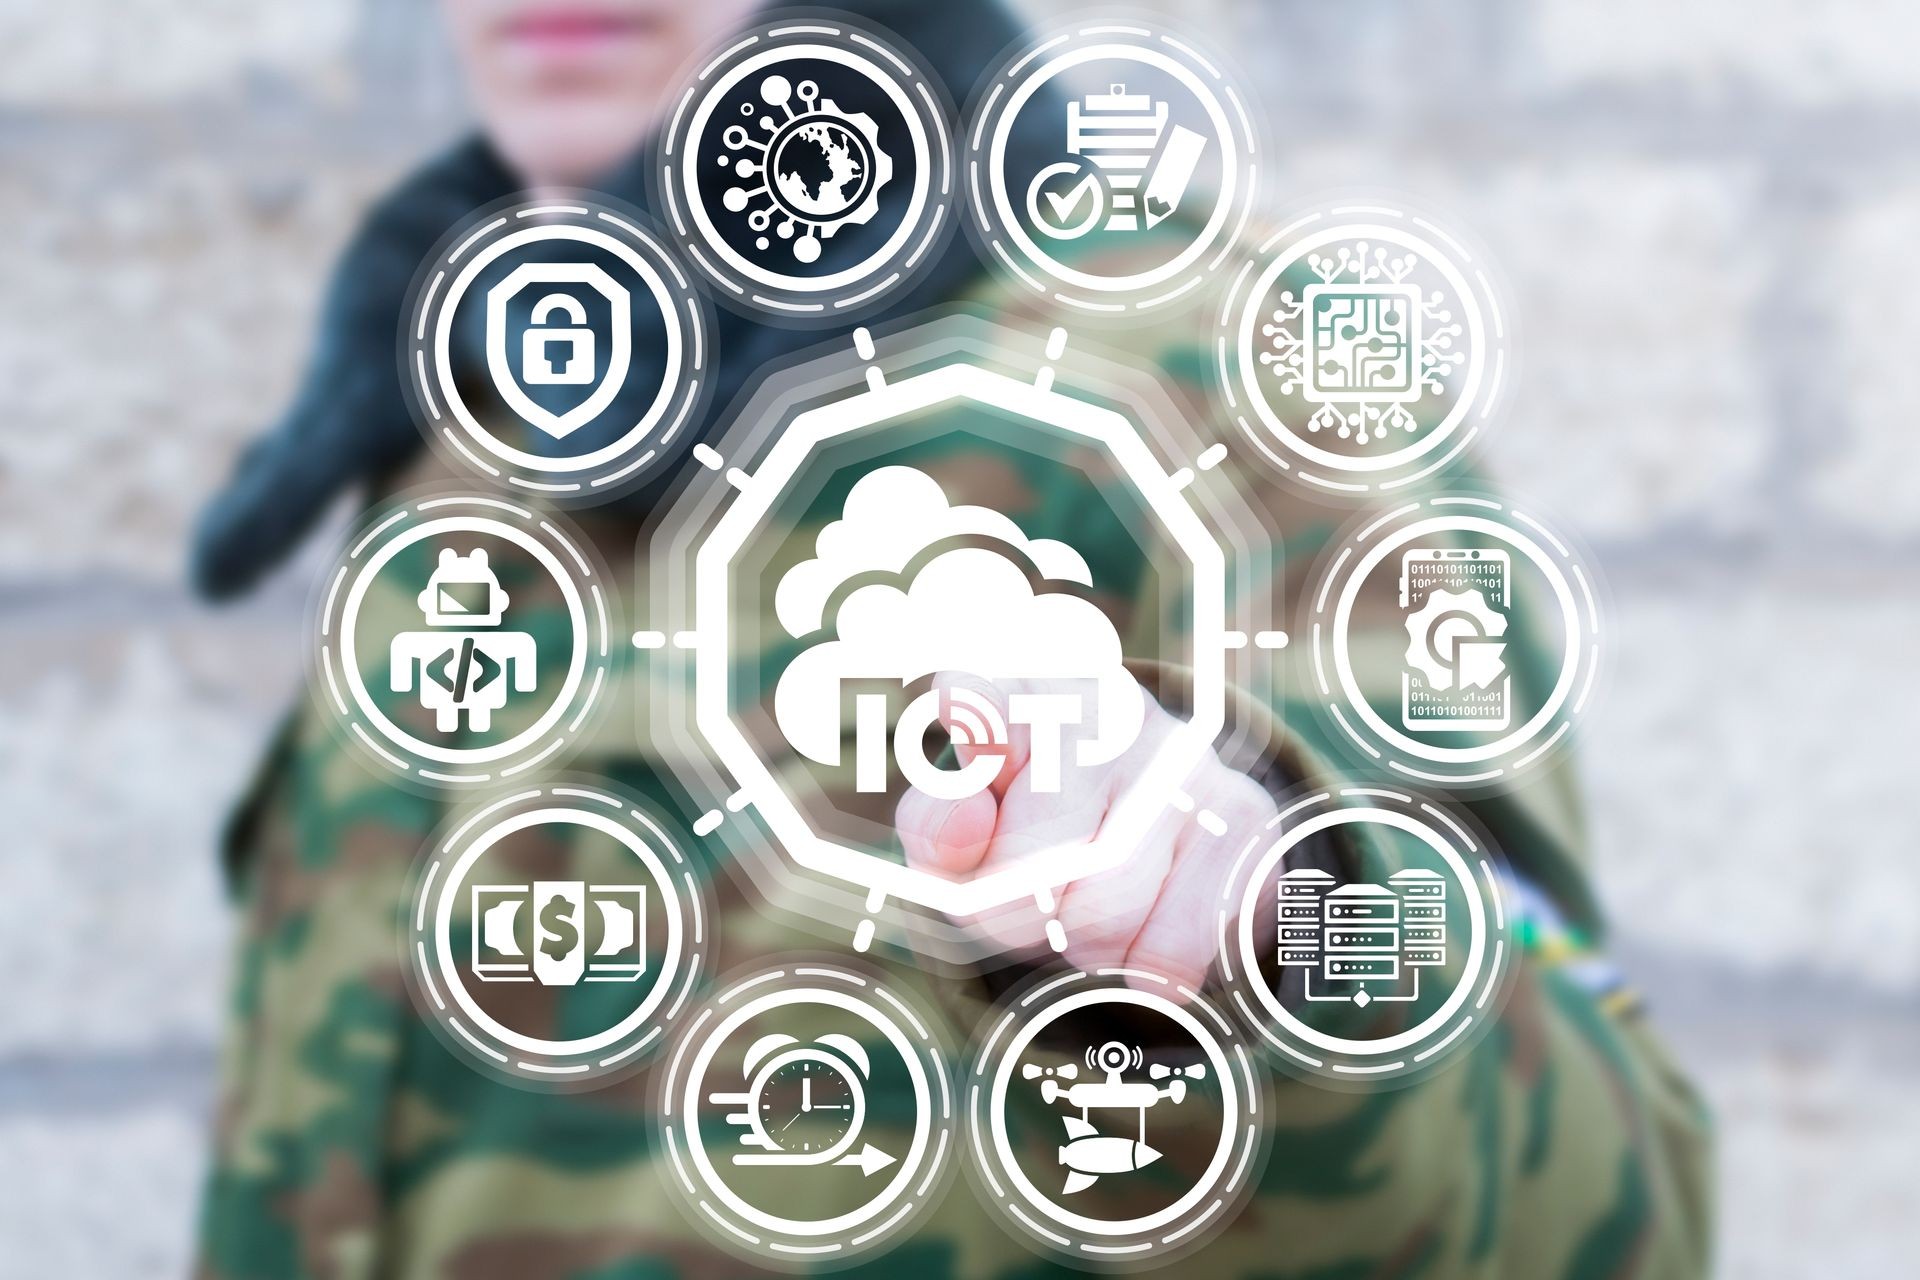 Soldier pushing a button iot with cloud on a virtual panel. Internet of things cloud computing military information technology.